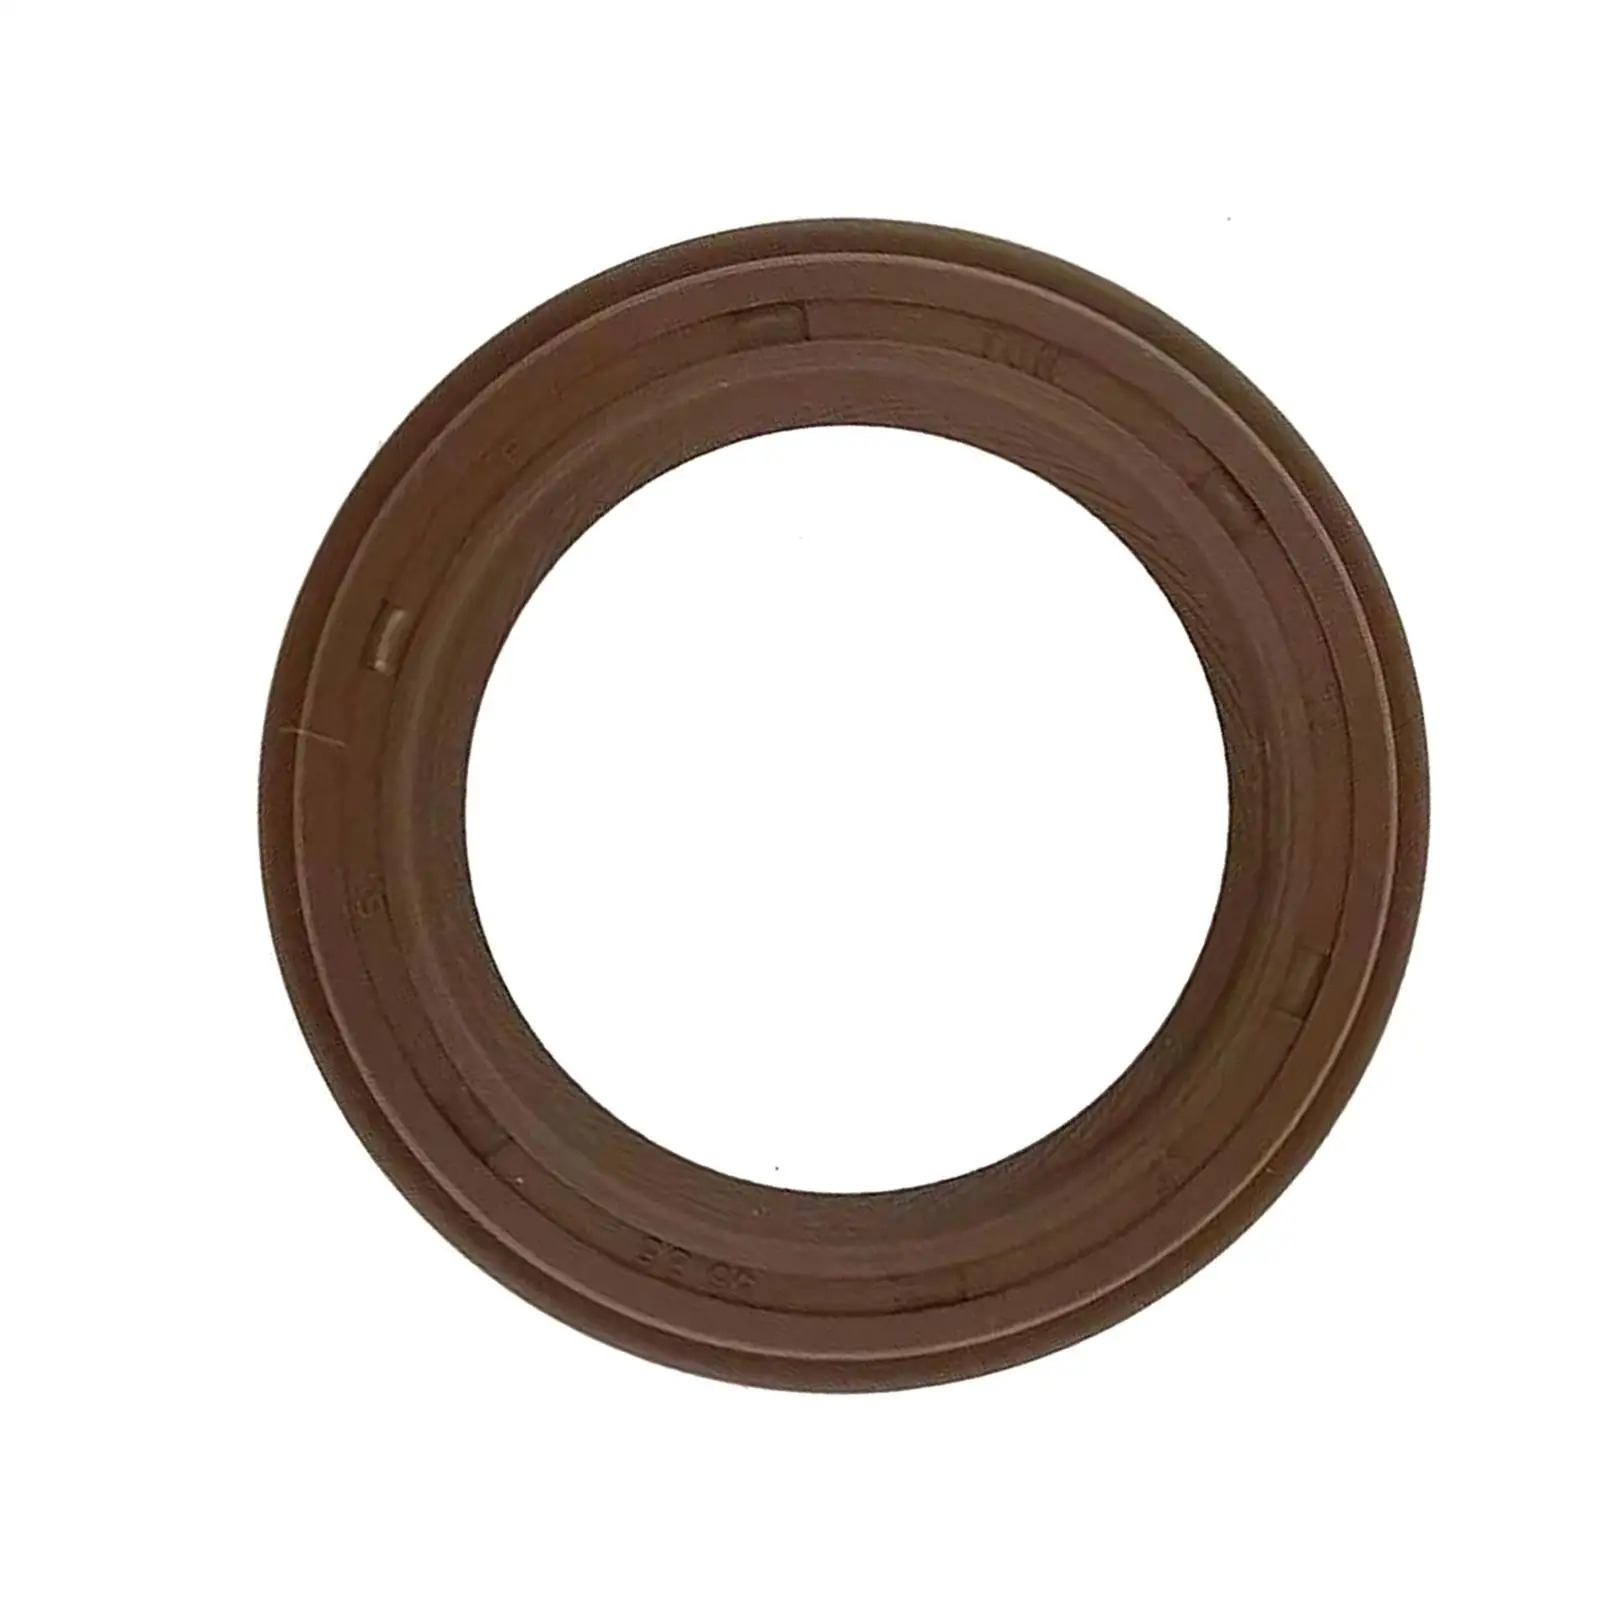 Oil Seal 93102-35M47 Replacement Repair Part for Outboard 25HP Professional